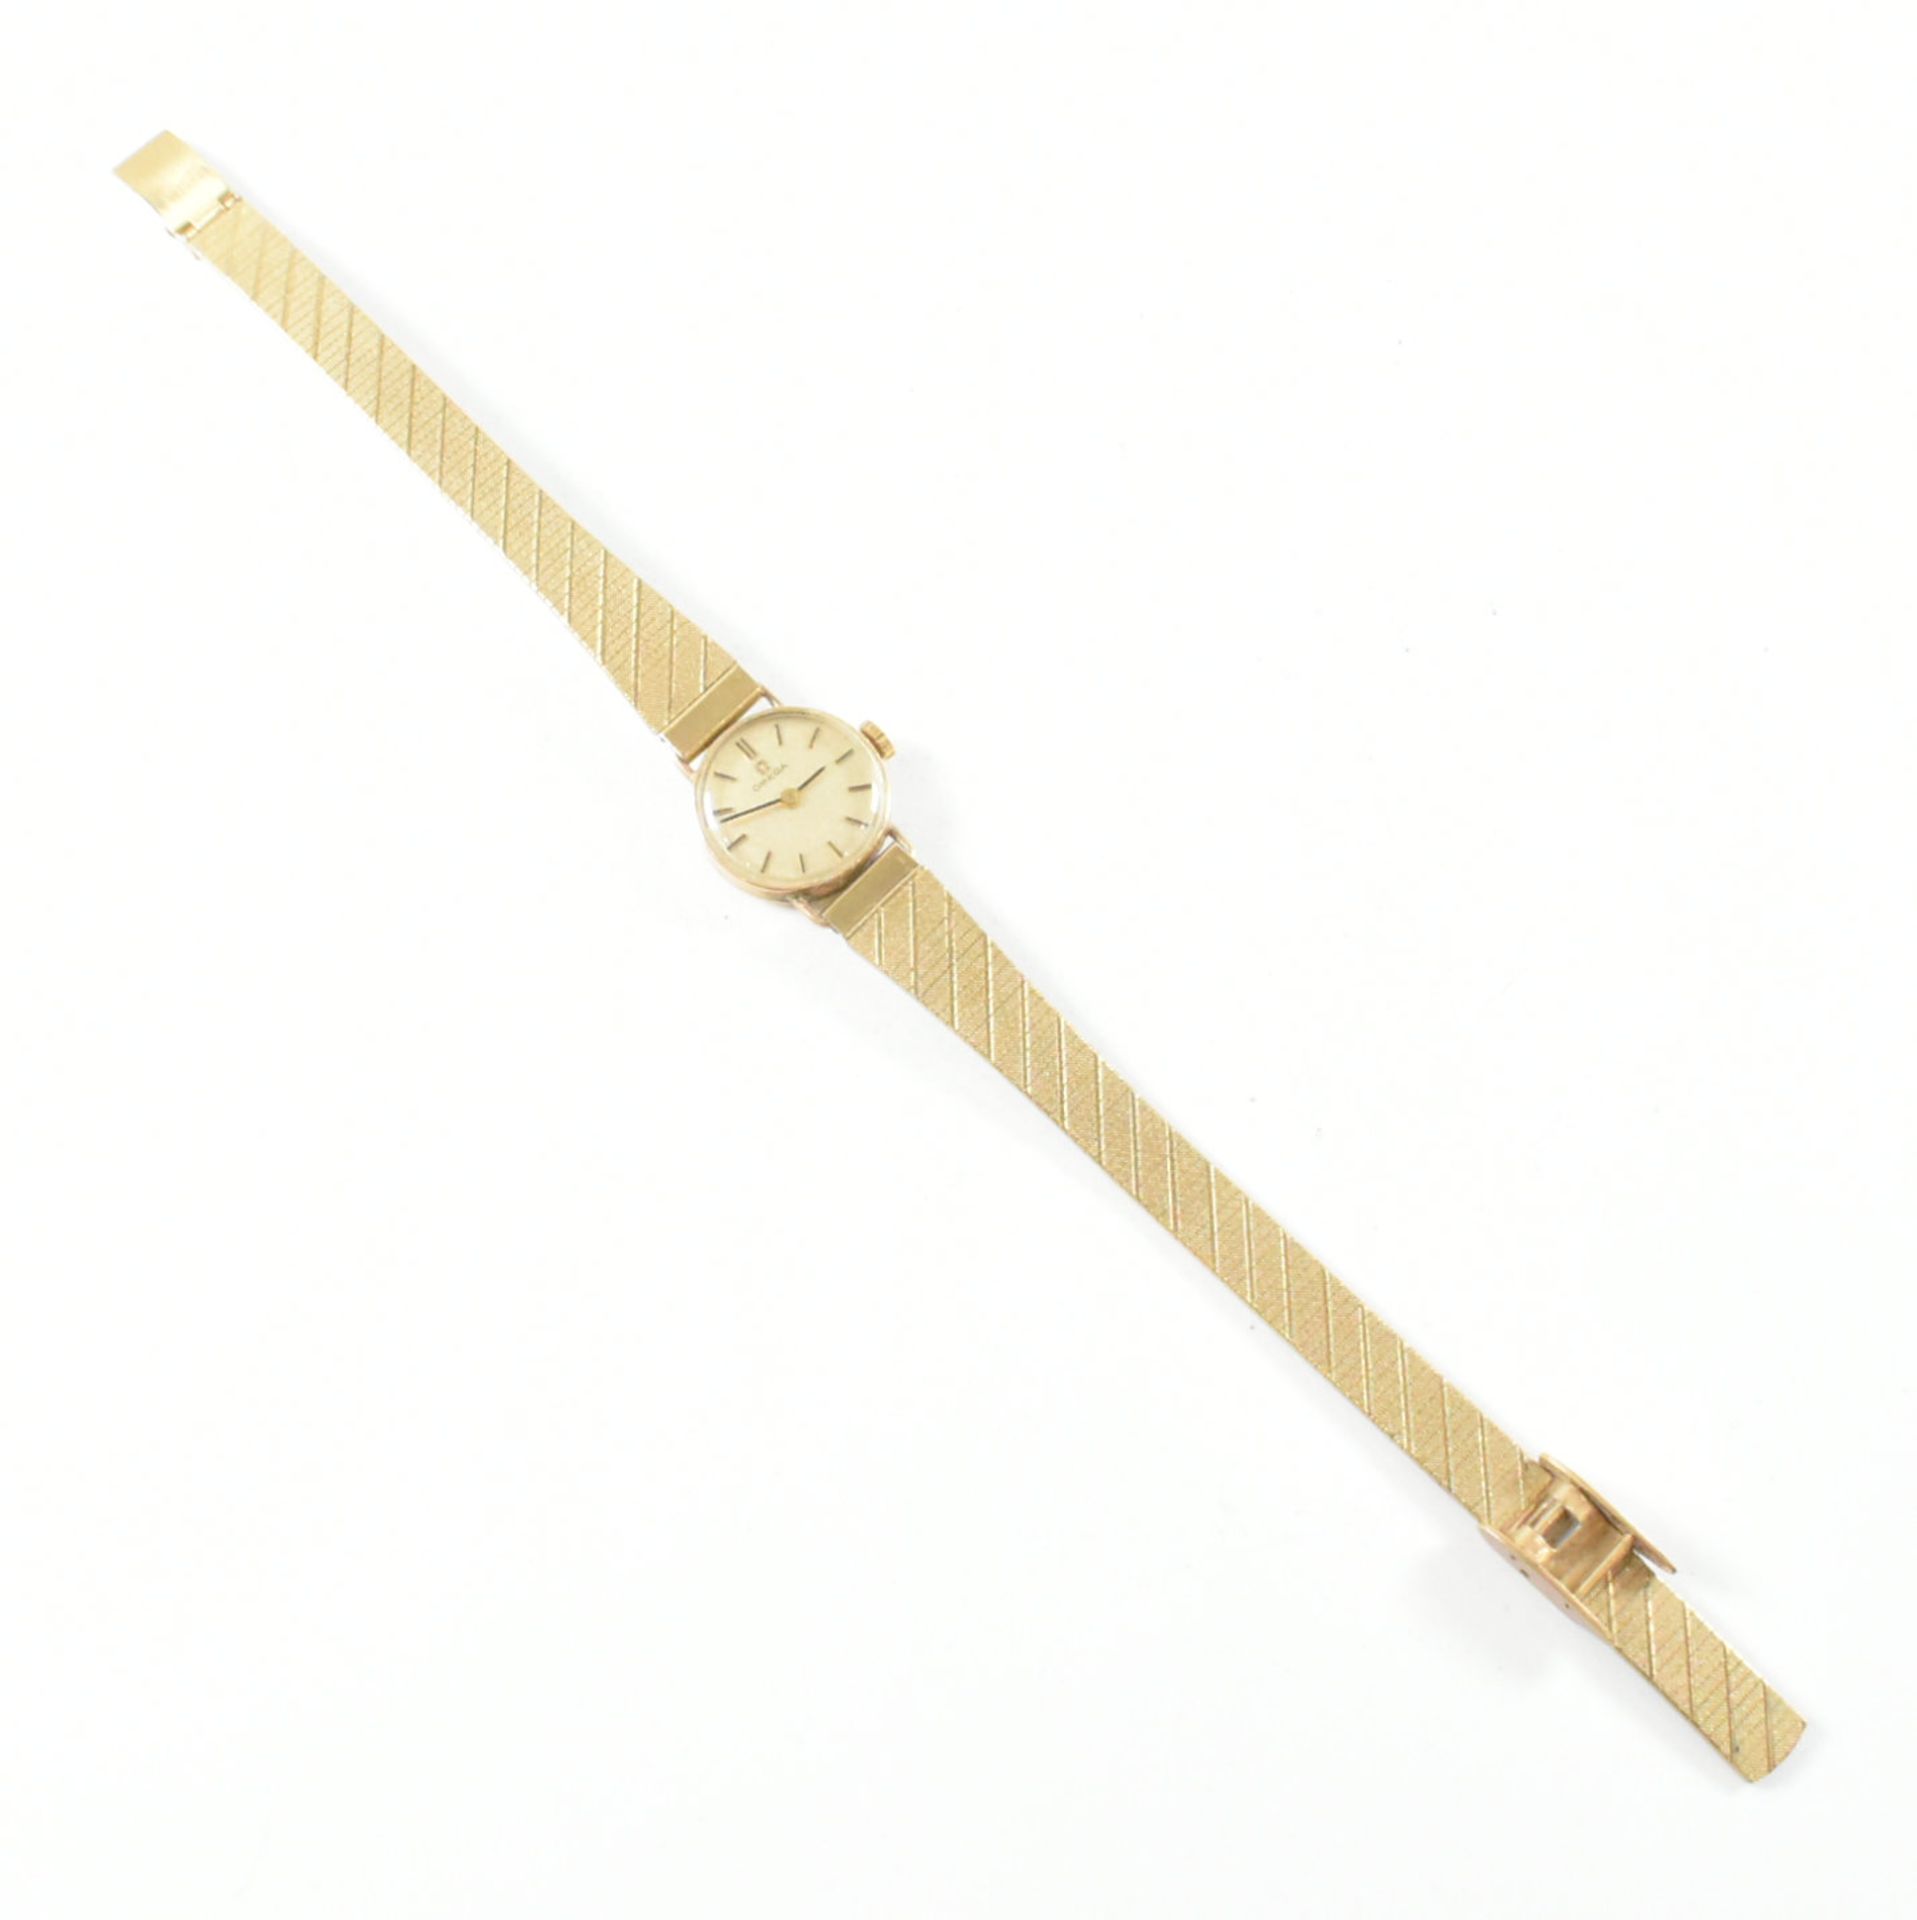 OMEGA HALLMARKED 9CT GOLD & STAINLESS STEEL COCKTAIL WATCH - Image 2 of 8